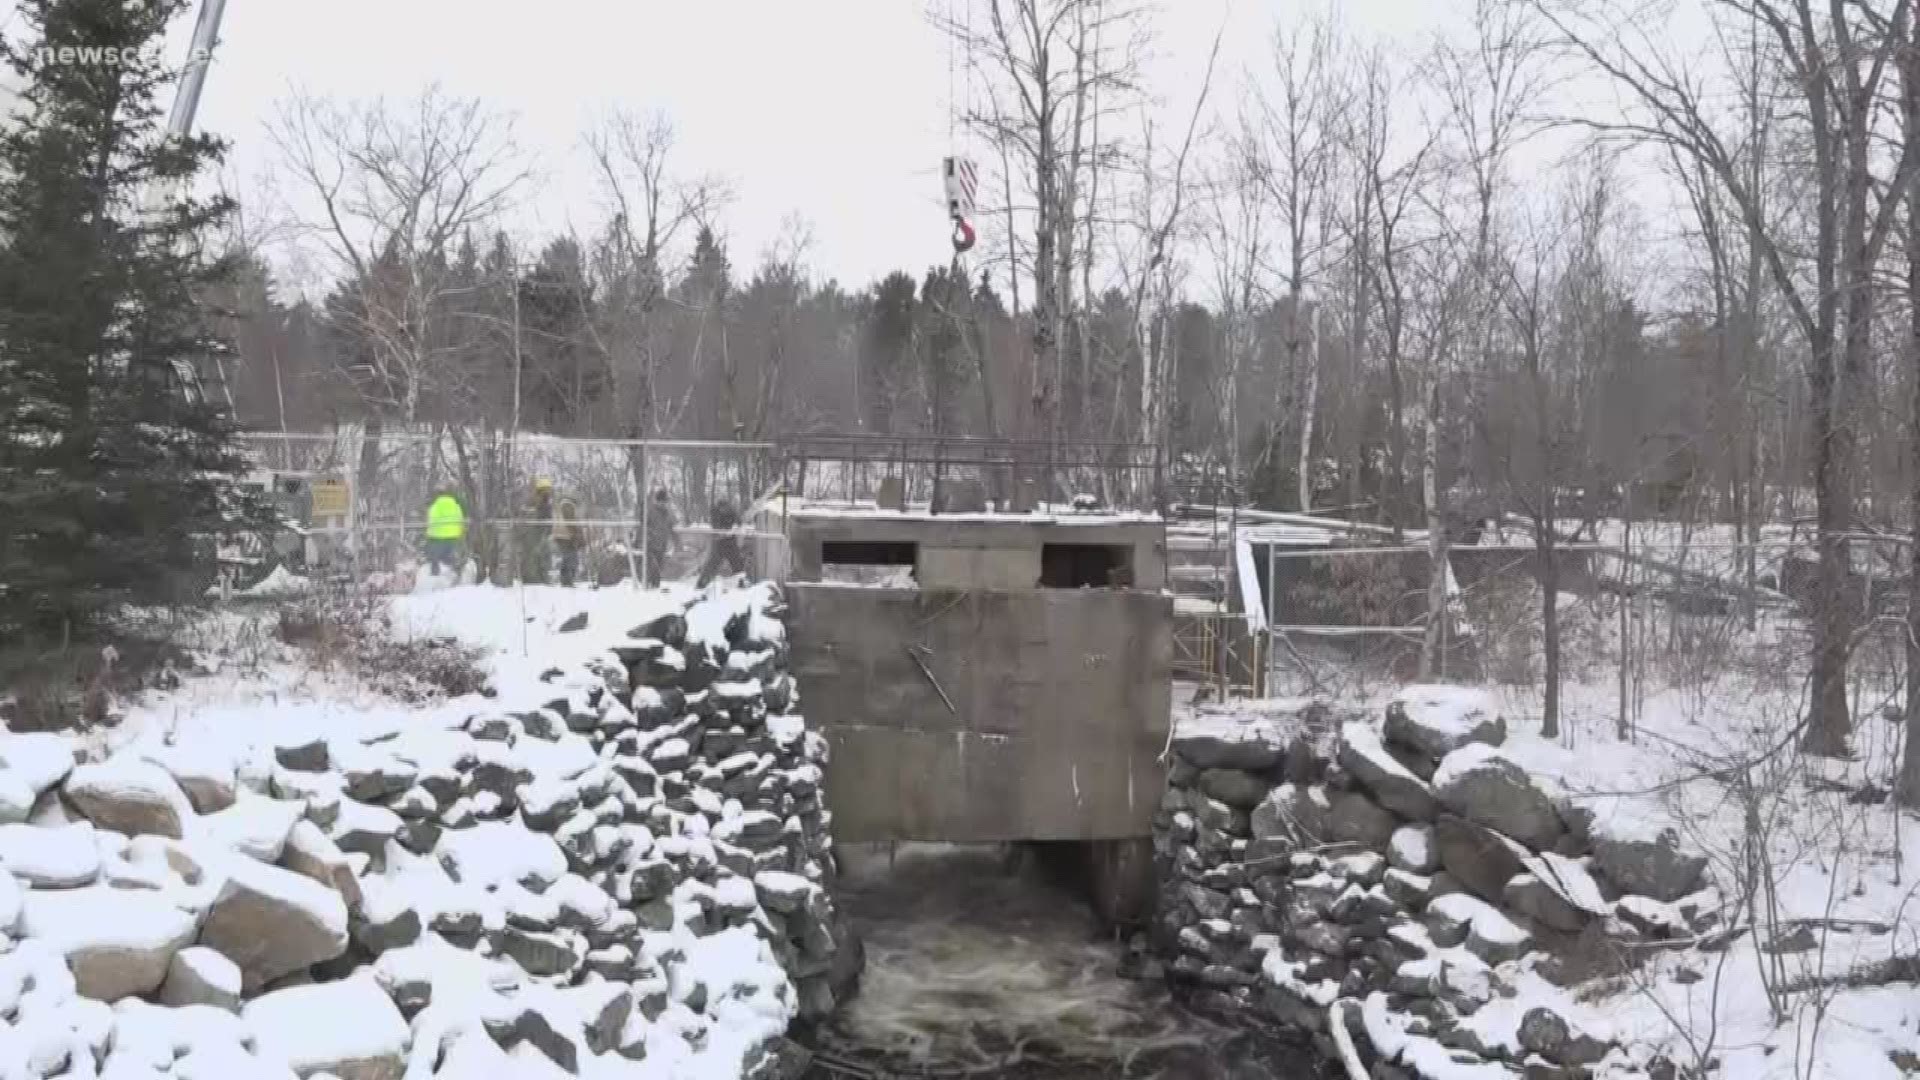 Alewives and Atlantic salmon soon will have an easier time navigating the Dennys River and reaching Meddybemps Lake with the removal of this power station.